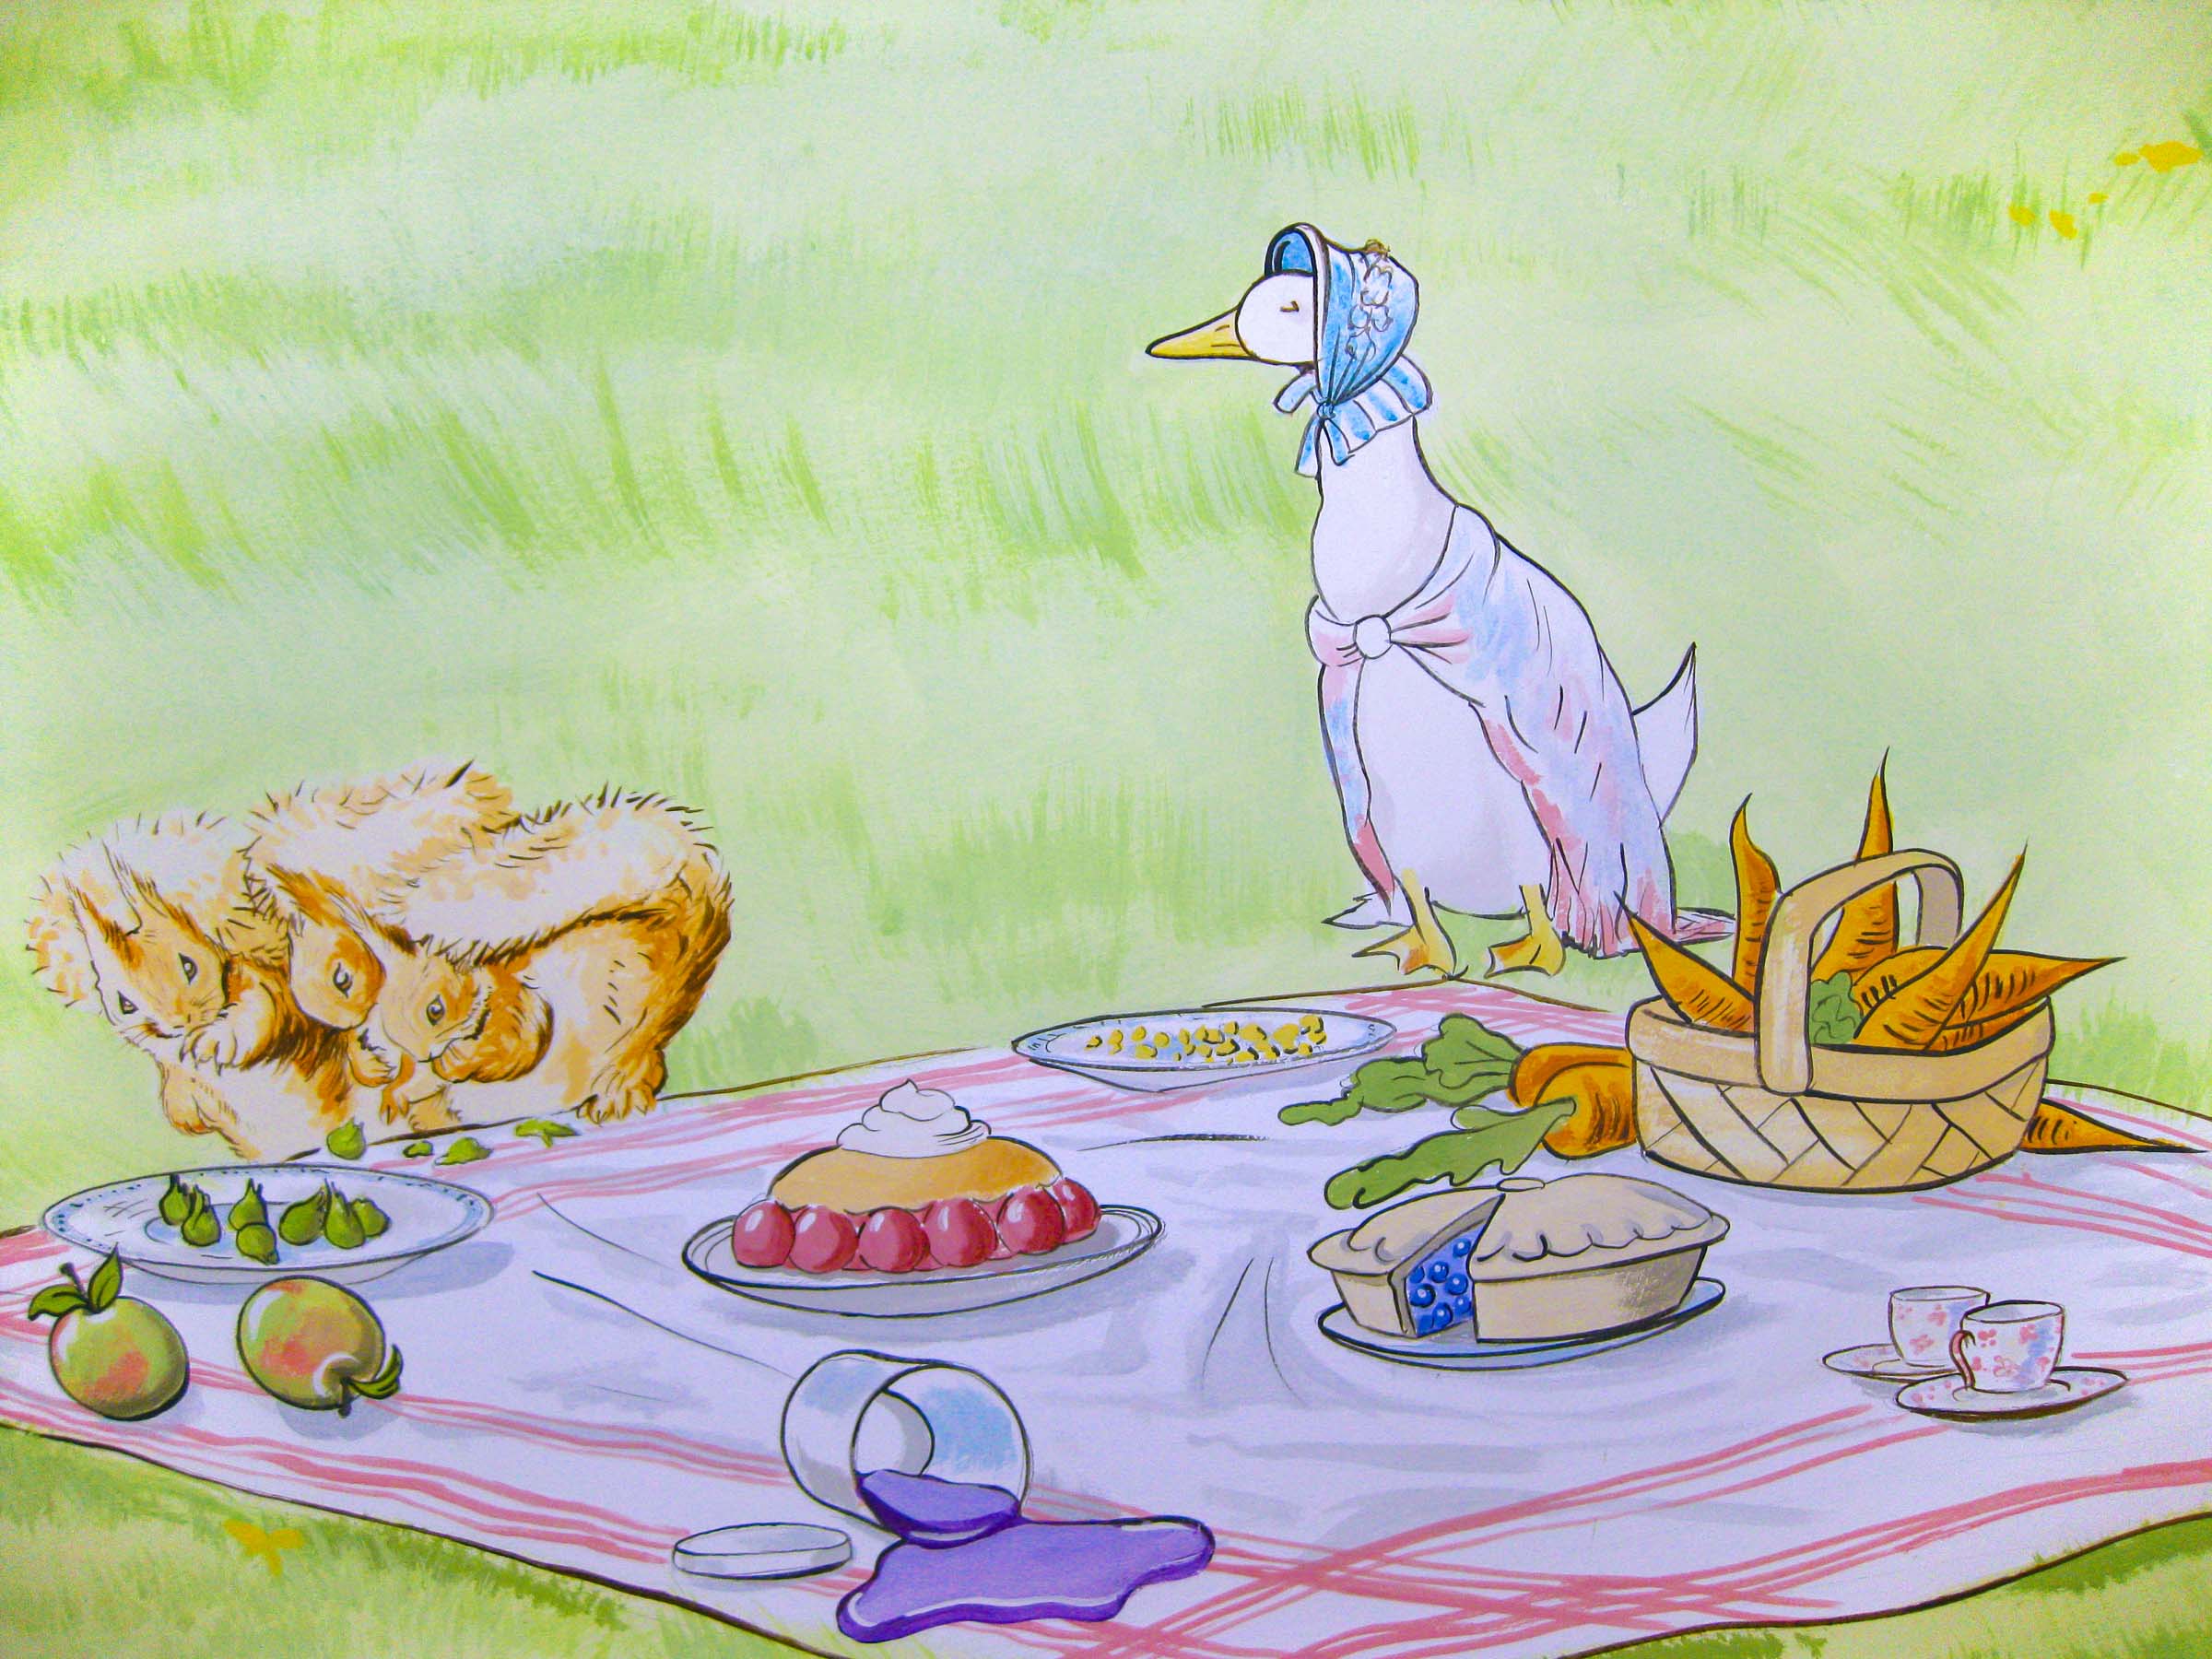 In the style of Beatrix Potter jemima puddle duck